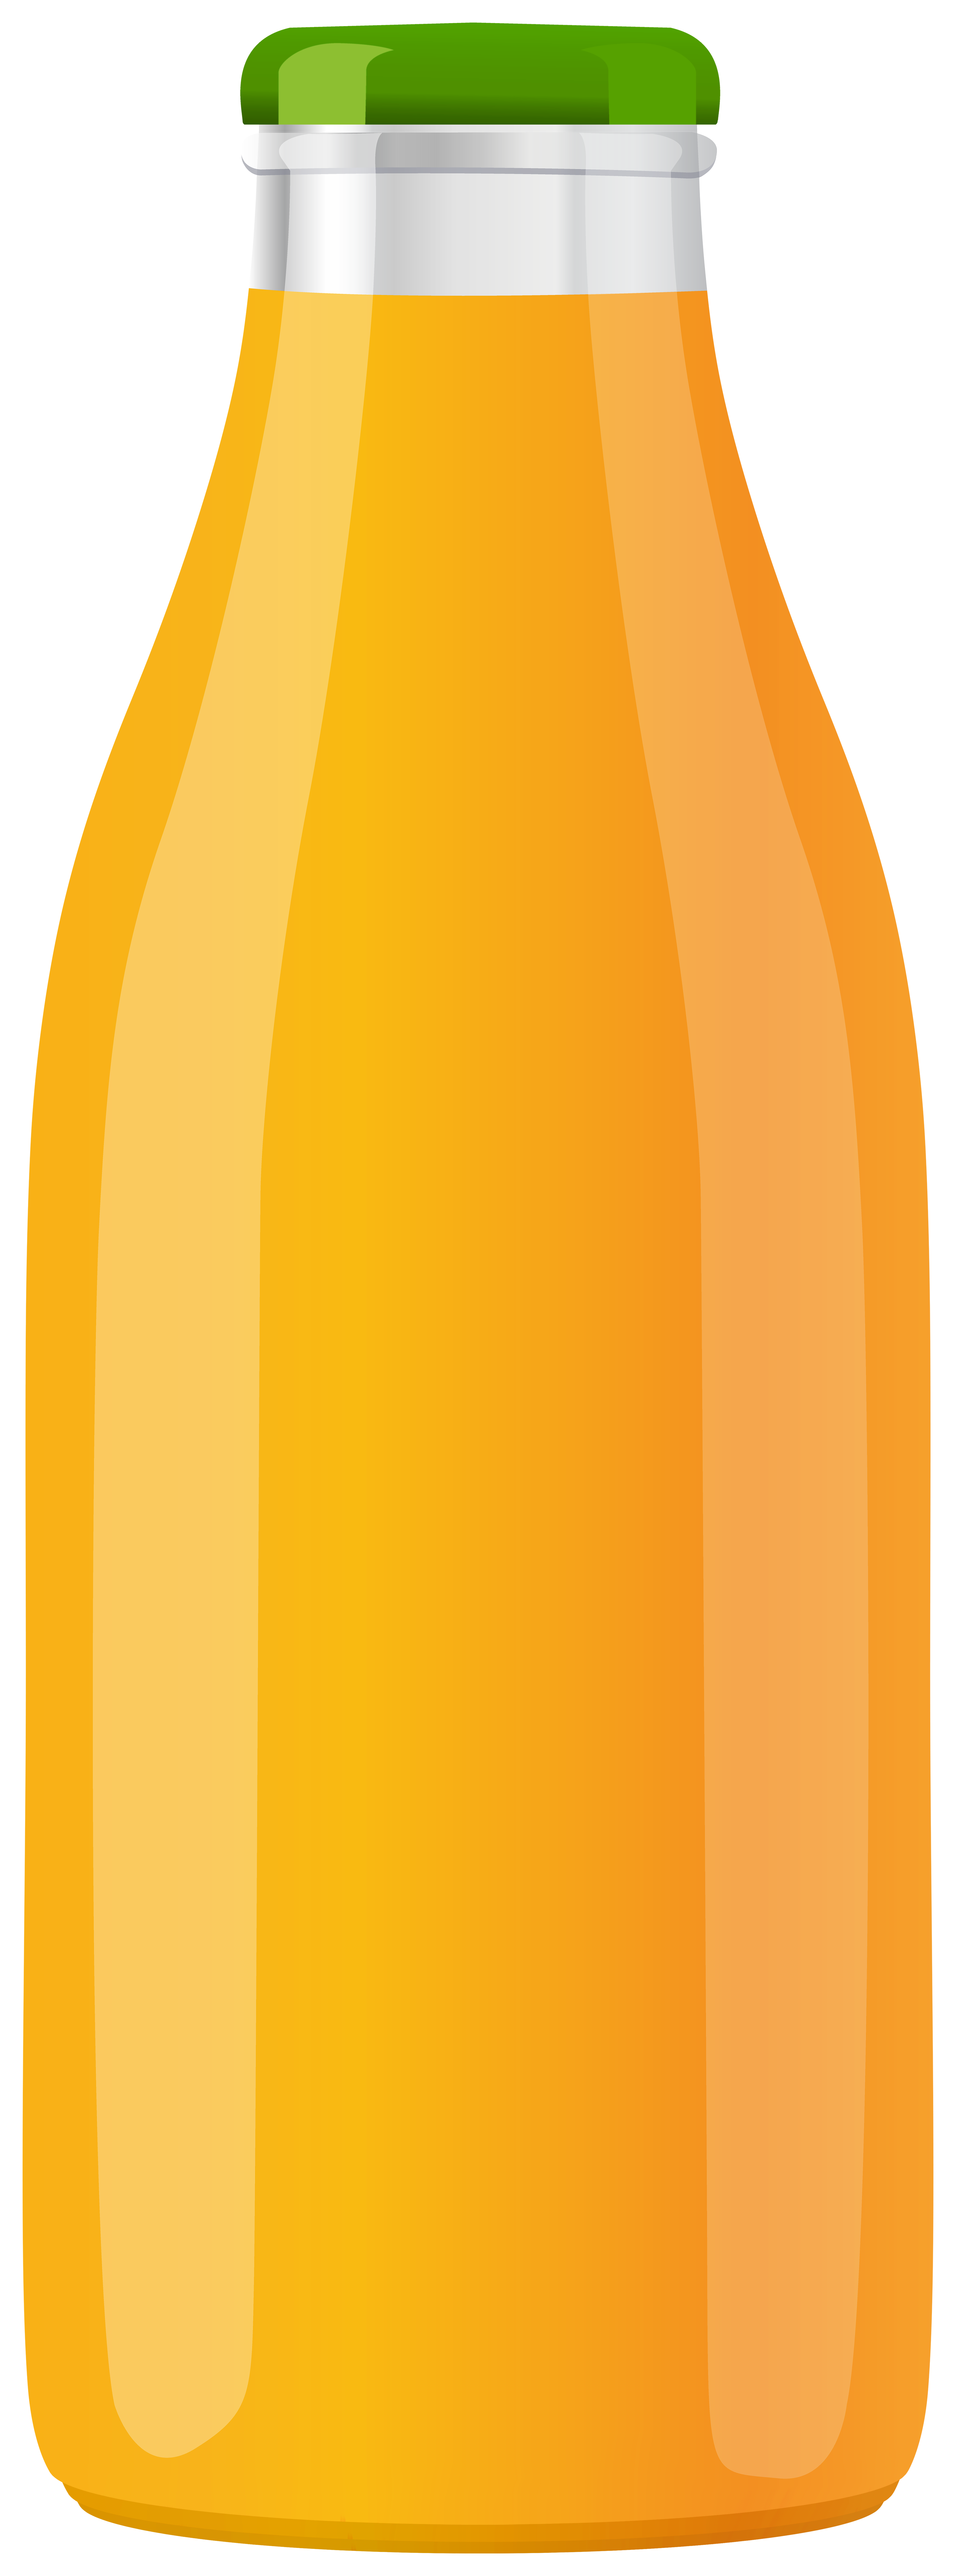 Juice Bottle Photos and Images